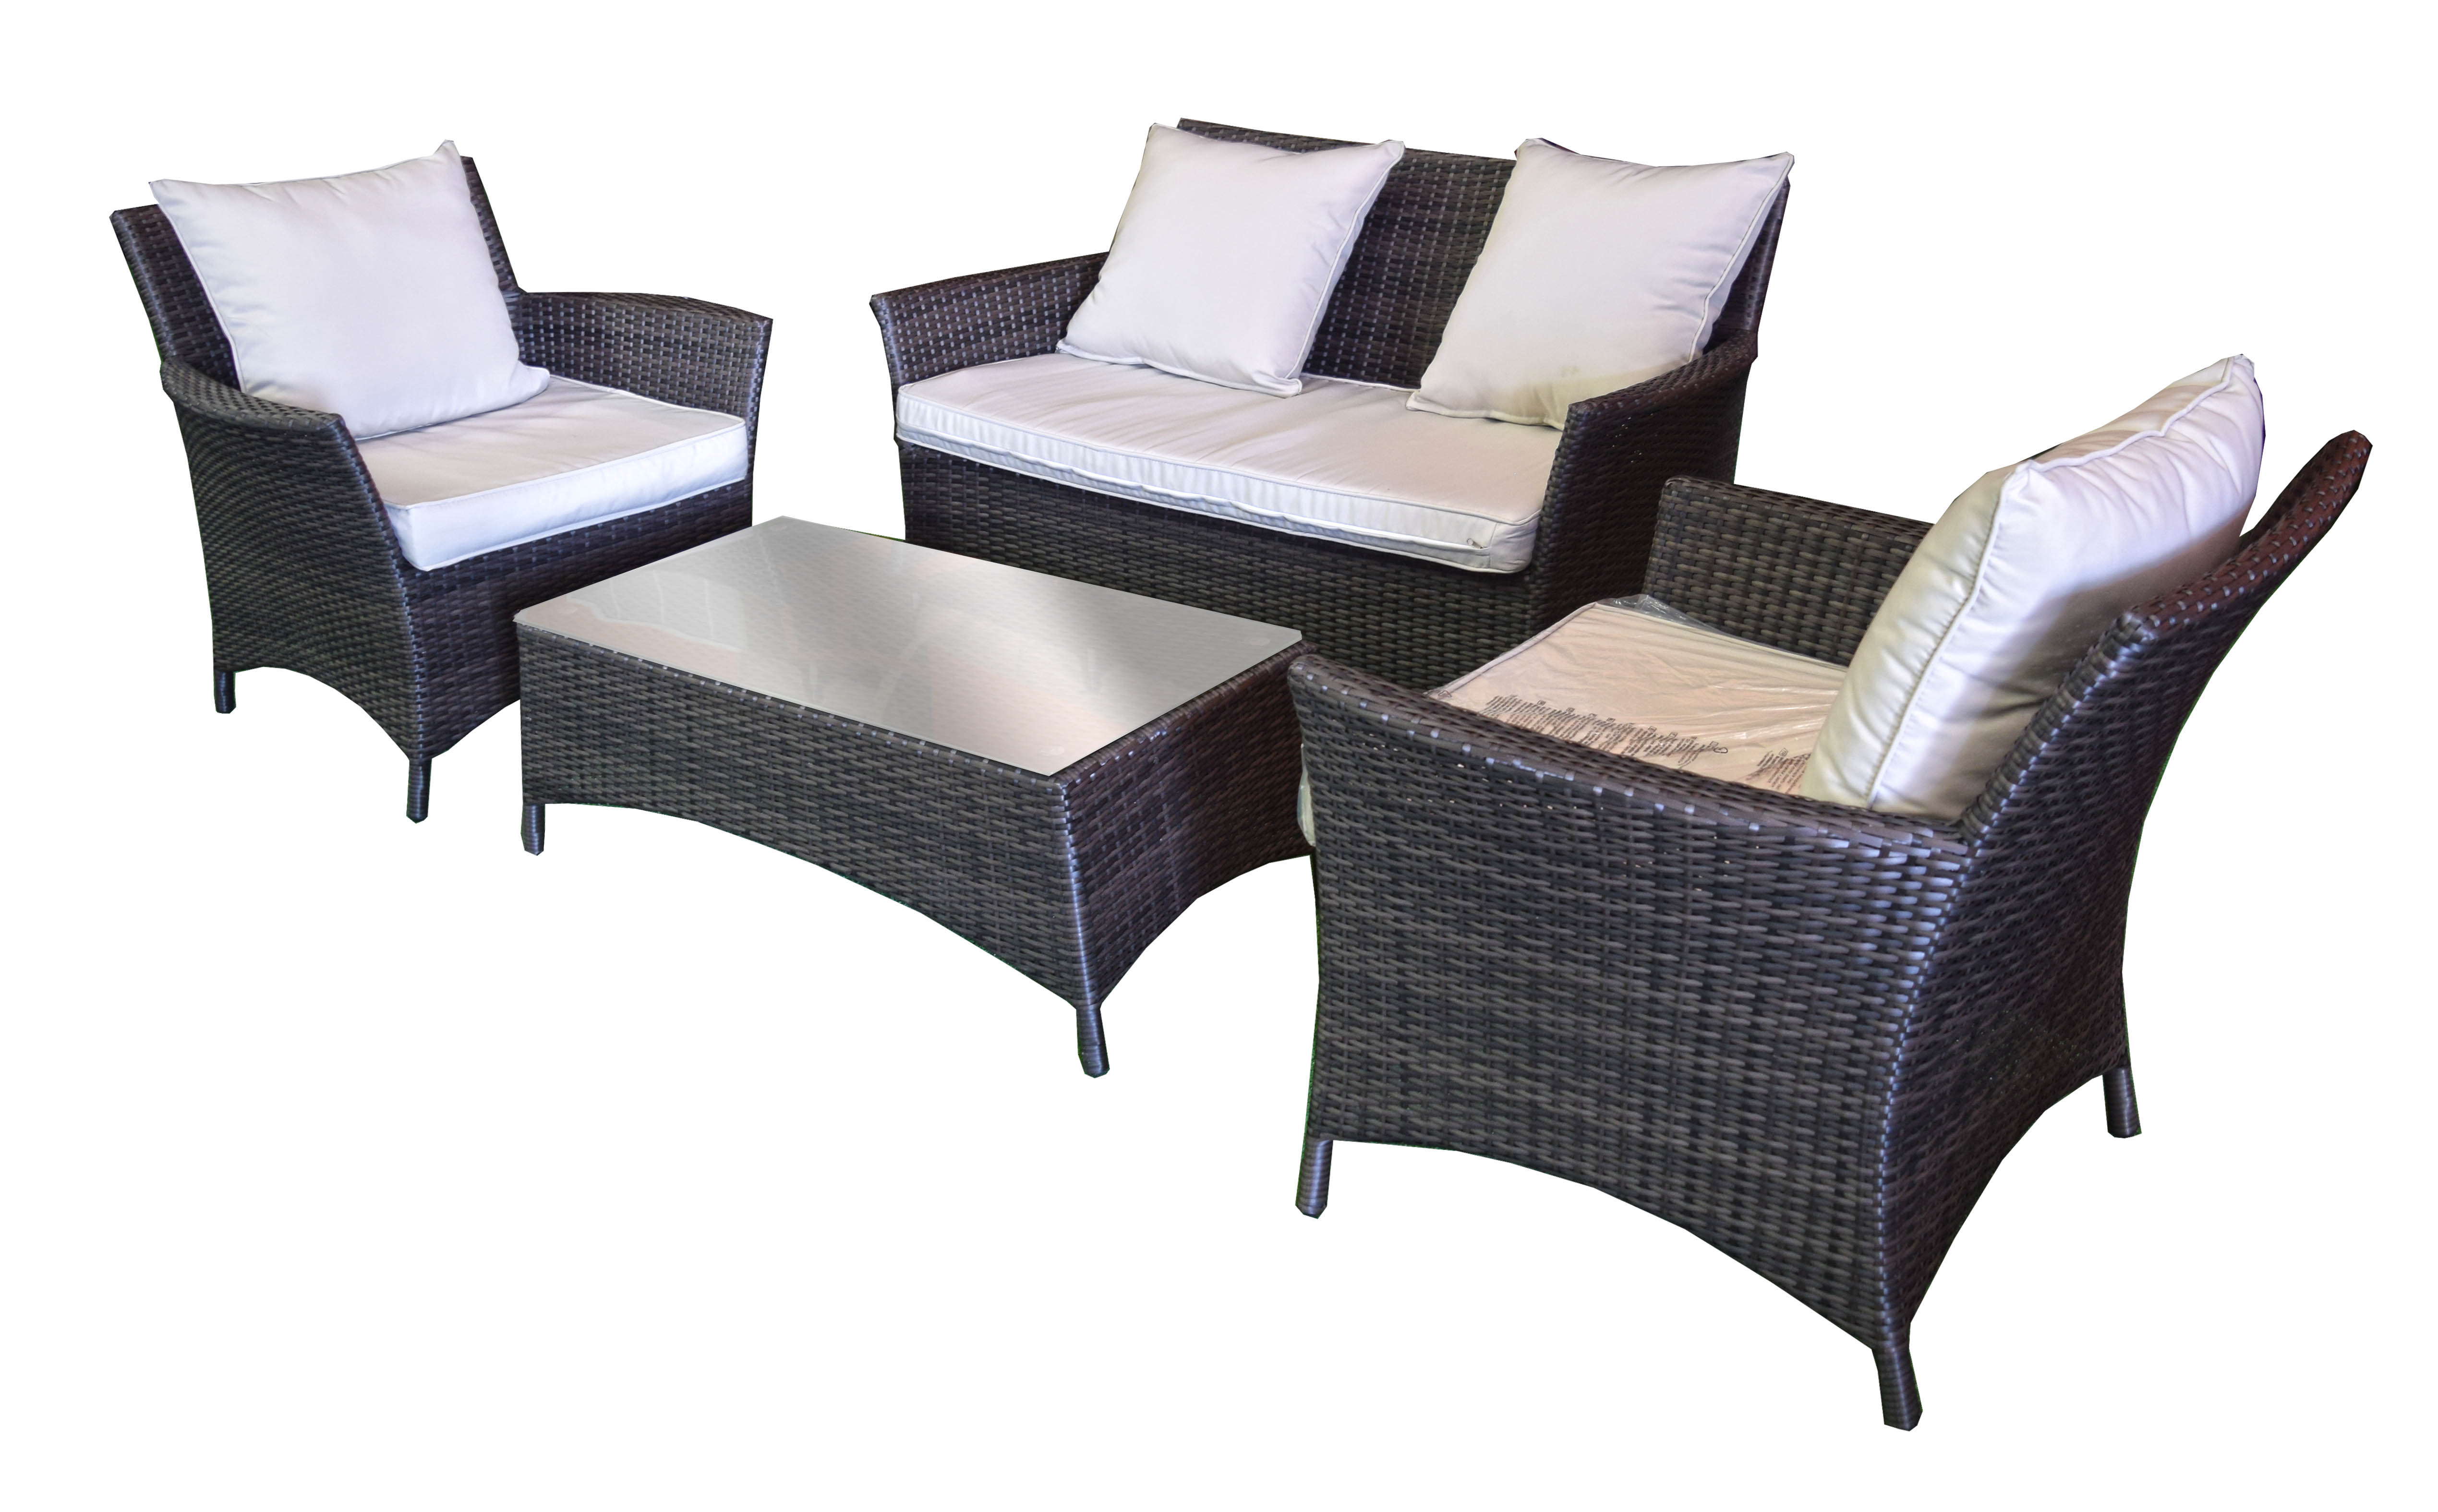 Outdoor Lounge Furniture Trinidad inside proportions 5078 X 3150